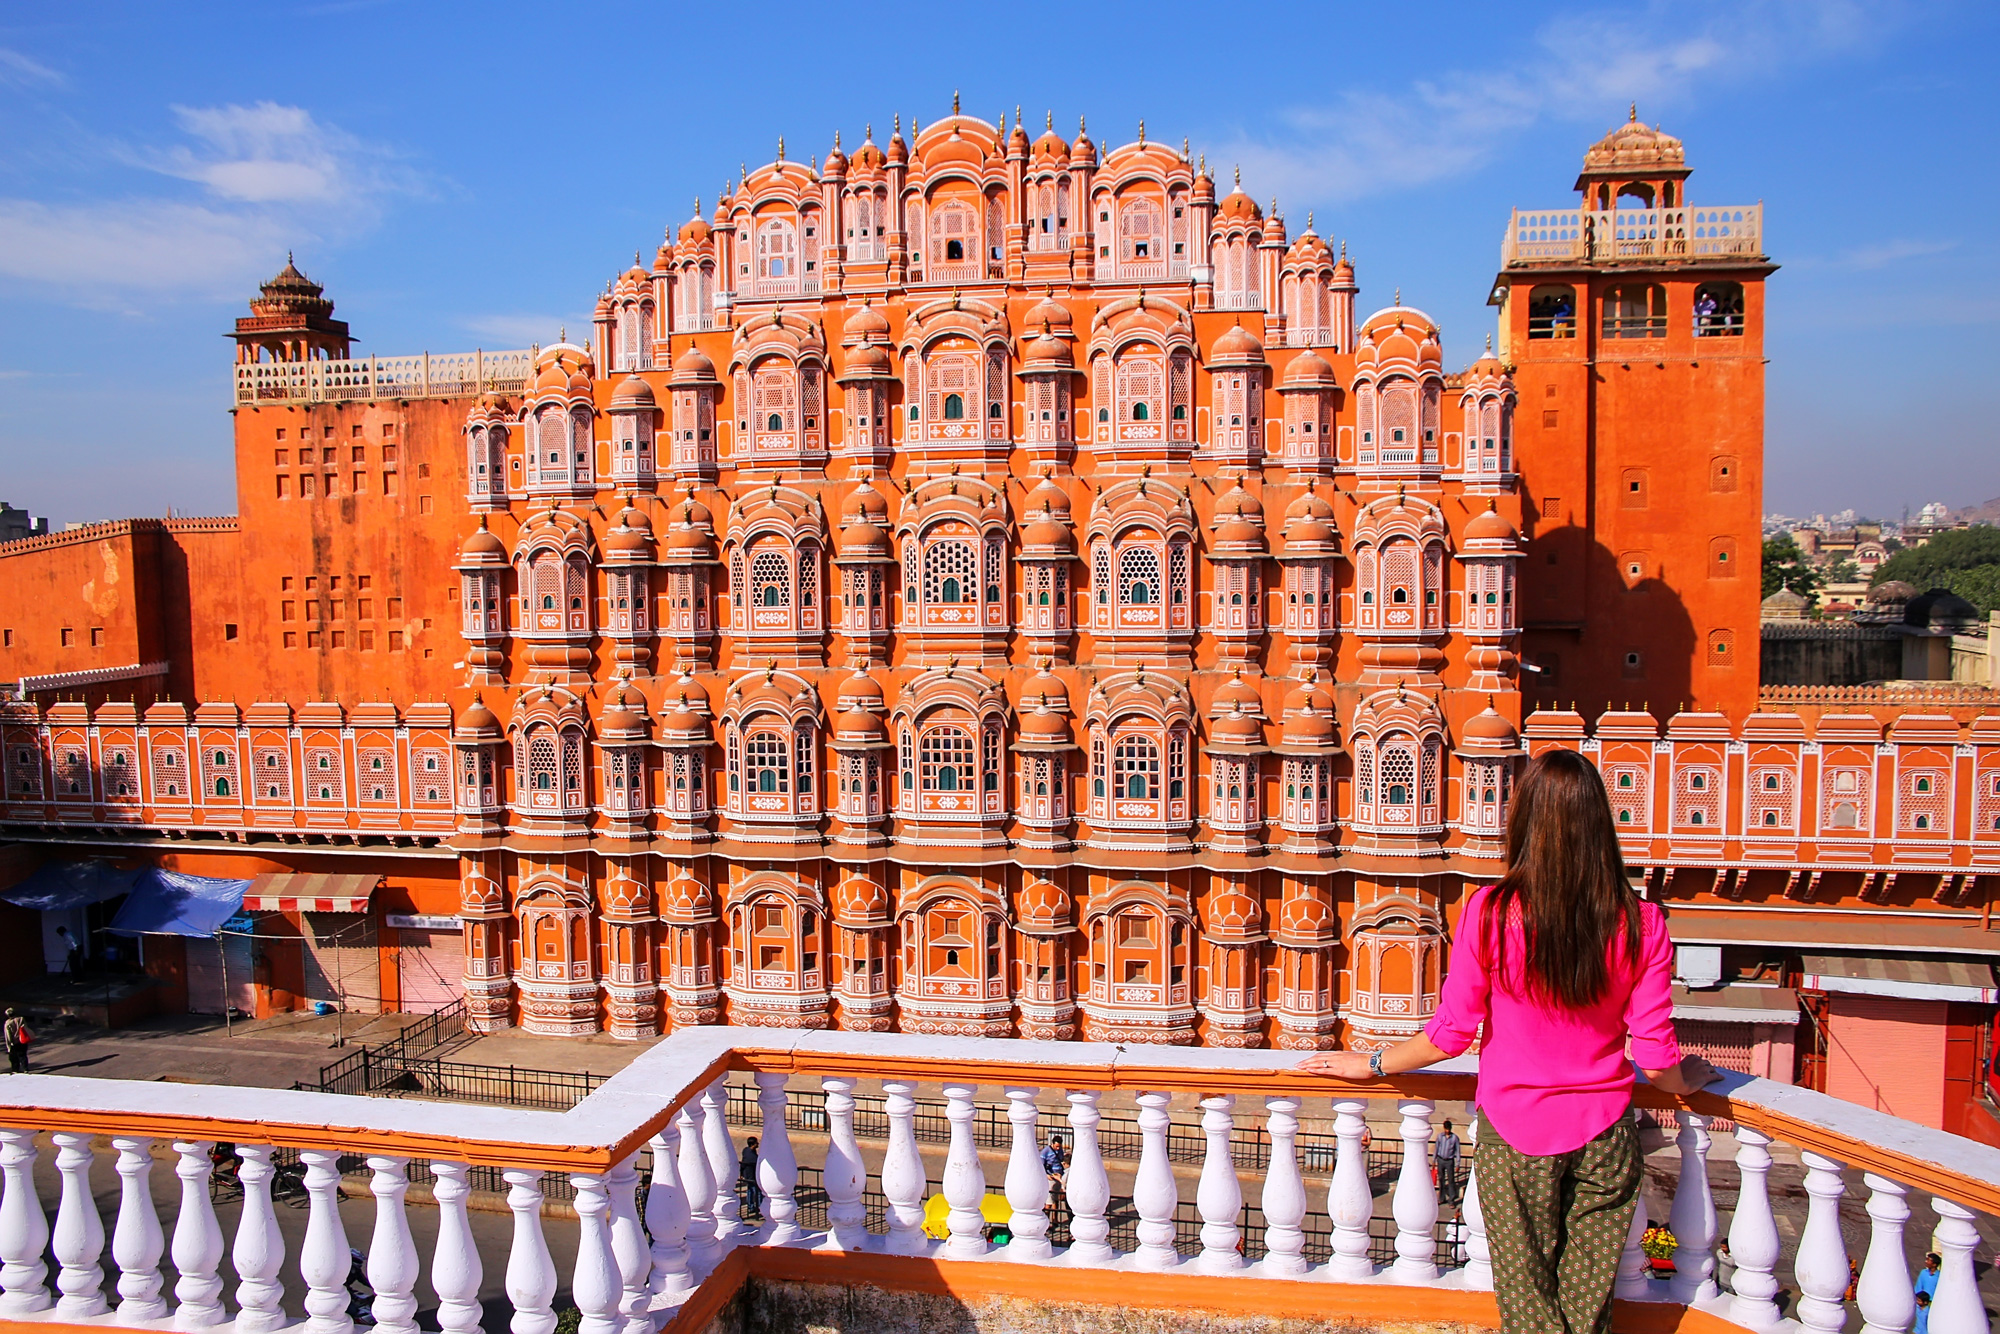 Day 2 - Jaipur: The Pink City